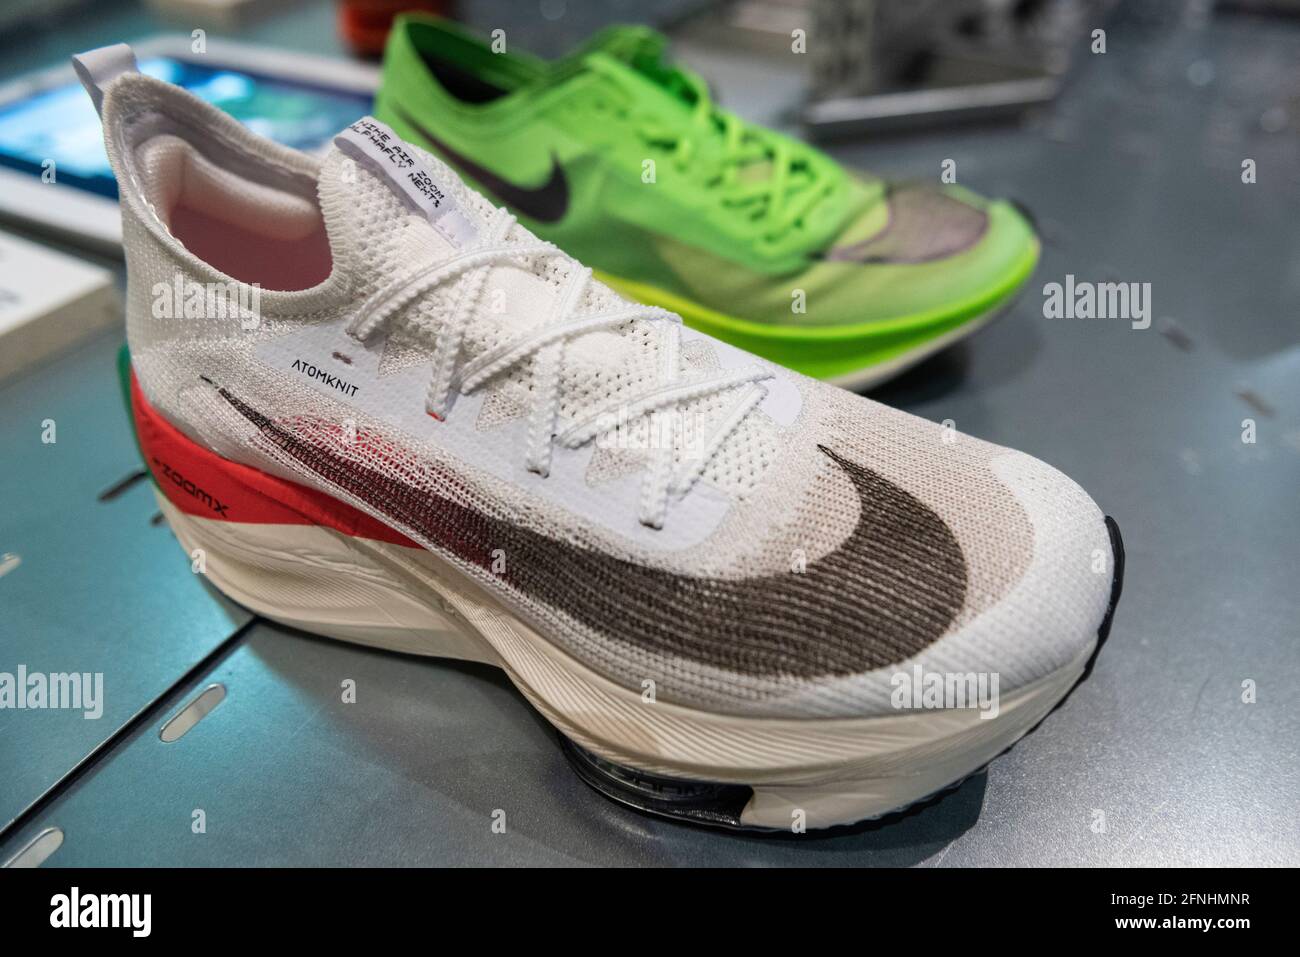 London, UK. 17 May 2021. "Nike Air Zoom Alphafly NEXT%", 2020, and "Nike  ZoomX Vaporfly NEXT%", 2019. Eliud Kipchoge wore prototype Alphafly to run  a marathon distance in under two hours. Preview